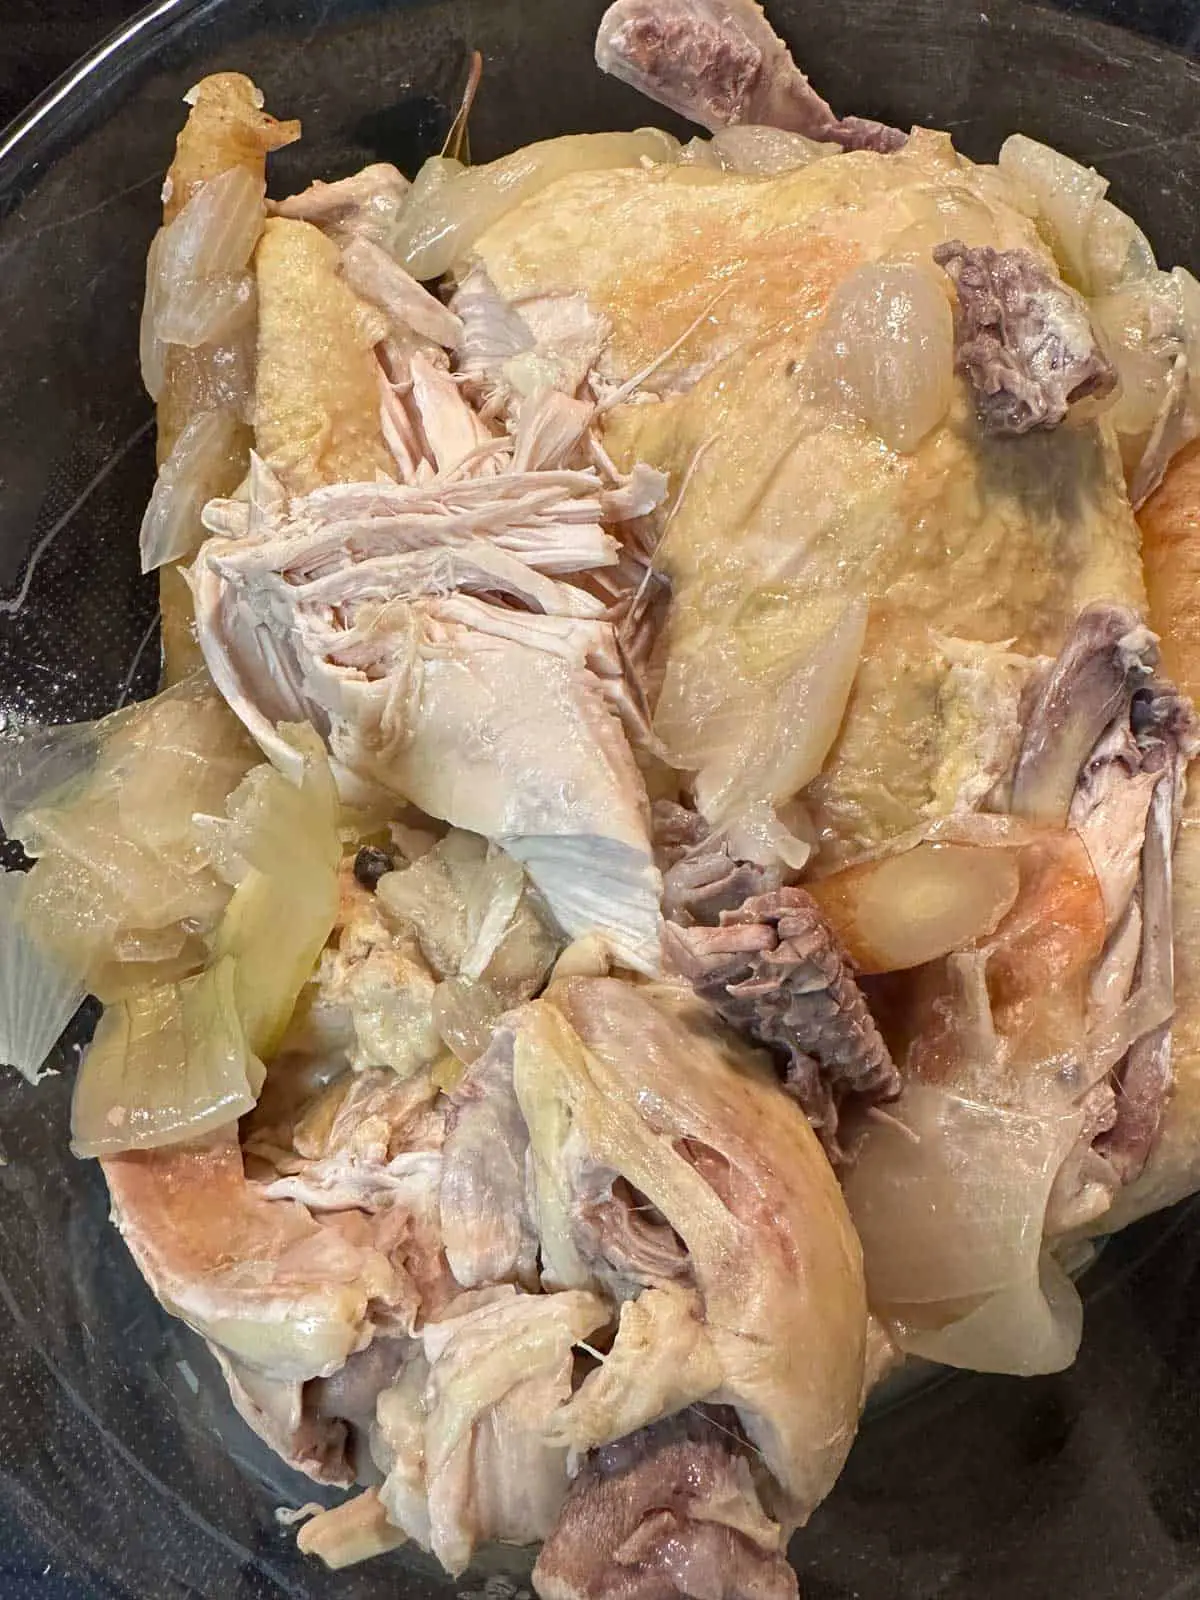 Cooked chicken which has been broken up so you can see some of the bones and the meat, and some cooked onions and carrots.